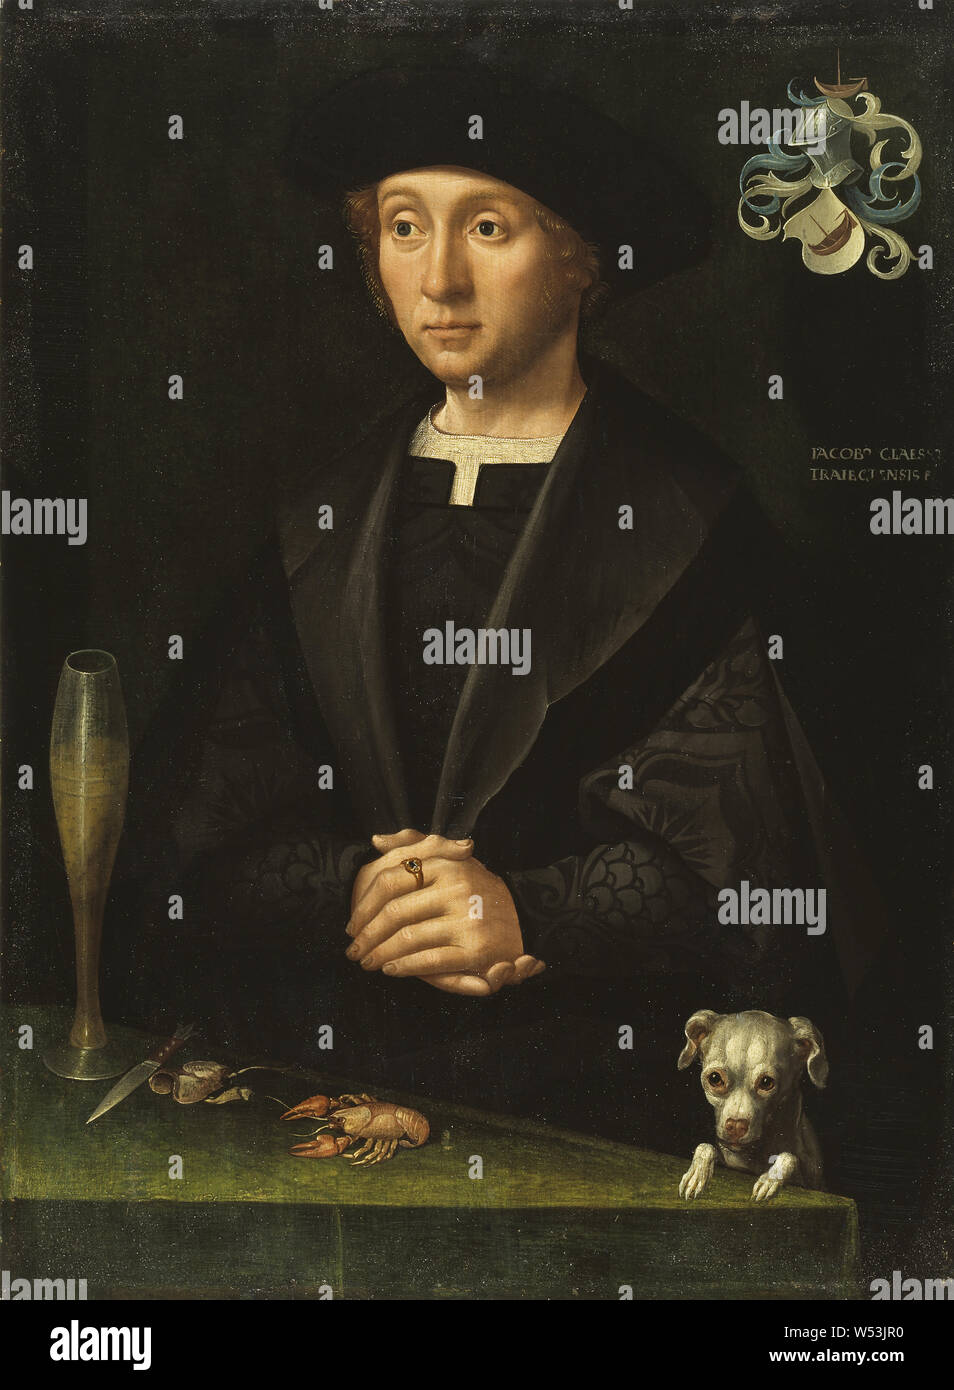 Jacob van Utrecht, Portrait of a Member of the Alardes Family, Portrait of a member of the family Alardes, painting, portrait, Oil on wood, Height, 41 cm (16.1 inches), Width, 30, cm (11.8 inches), Signed, IACOB CLAES TRAIECTENSIS Stock Photo